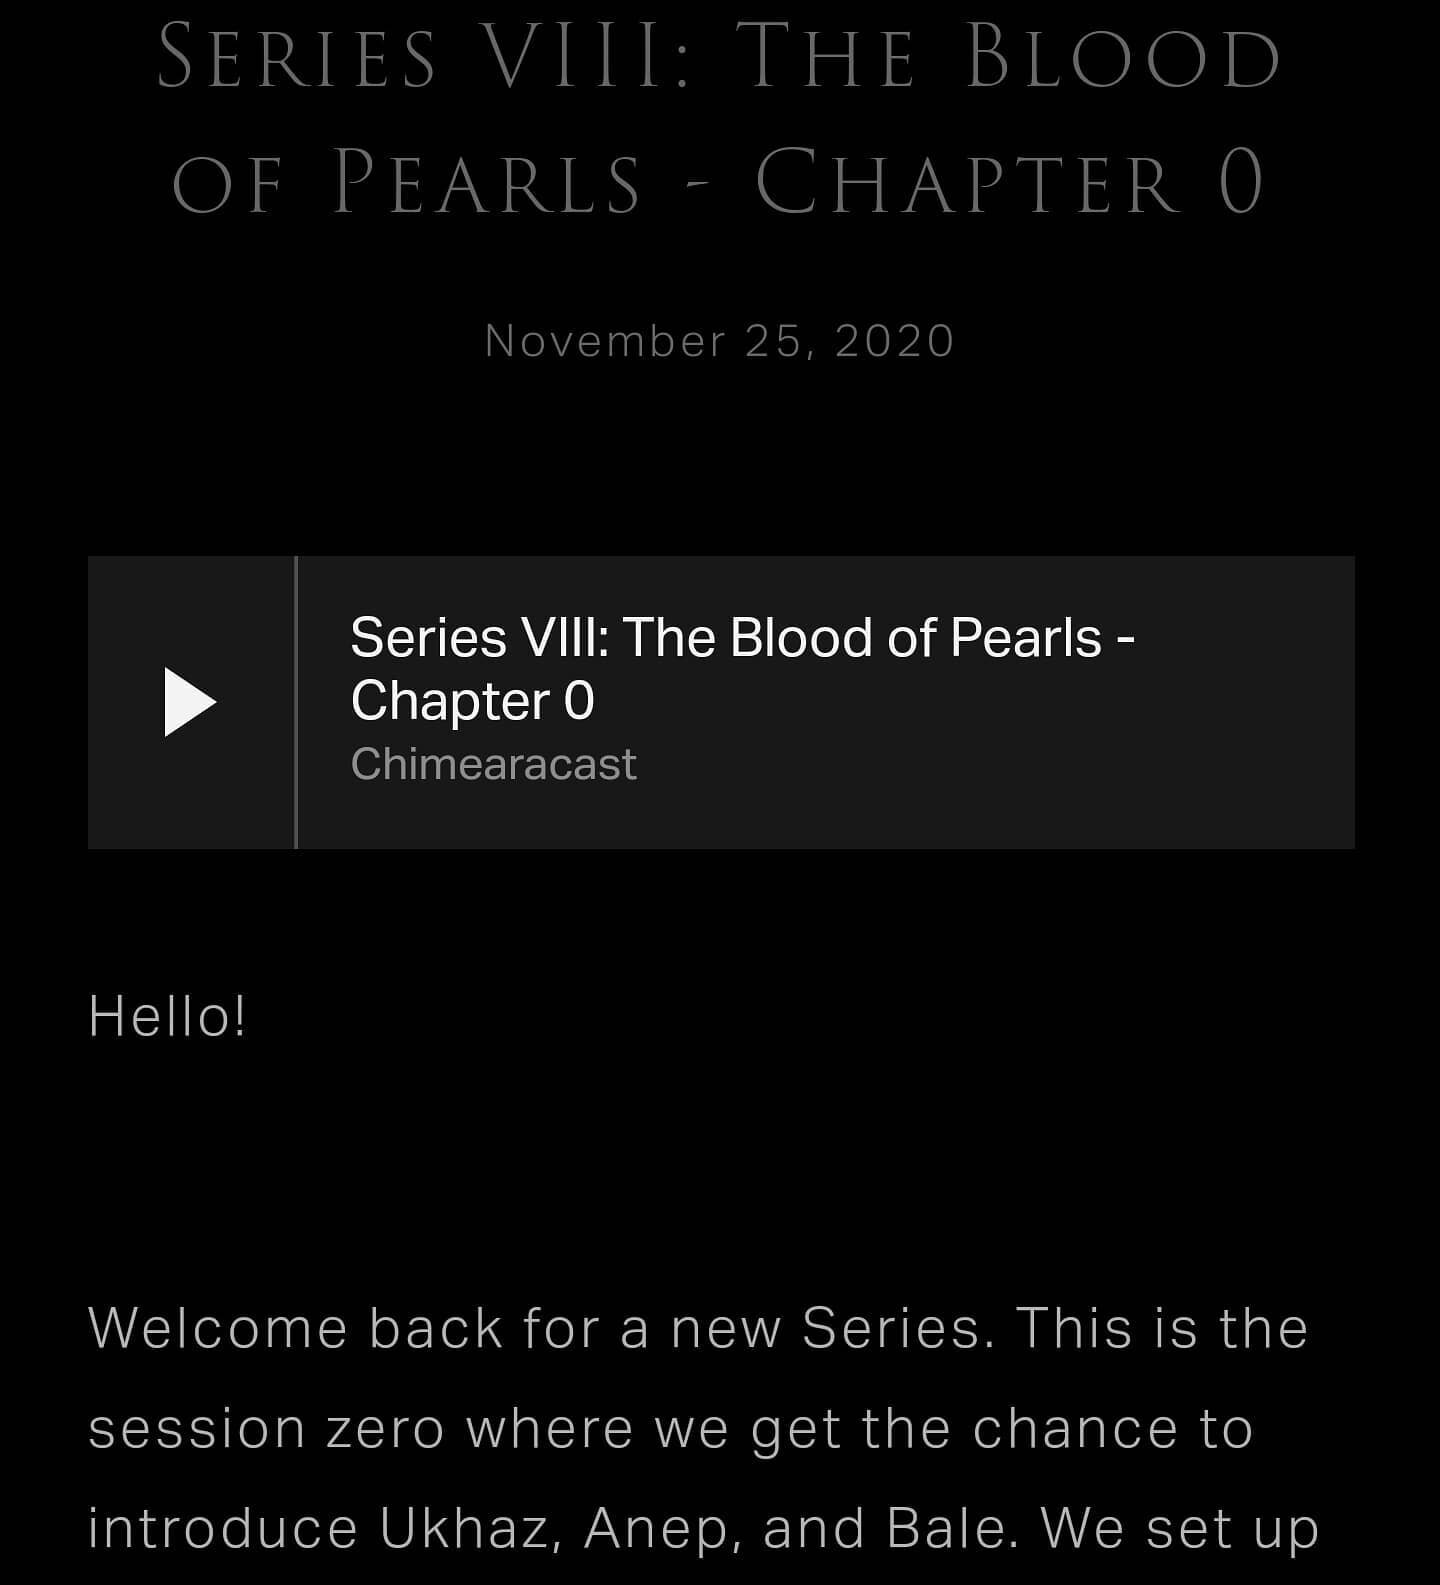 Earlier this week, we released the introduction to our new series, &quot;The Blood of Pearls&quot;. We meet our new cast of characters, Bale Vulmar the Channeler, Anep-Ra the (Monster) Slayer, and Ukhazkozakhed the Skirmisher! This will be the final 